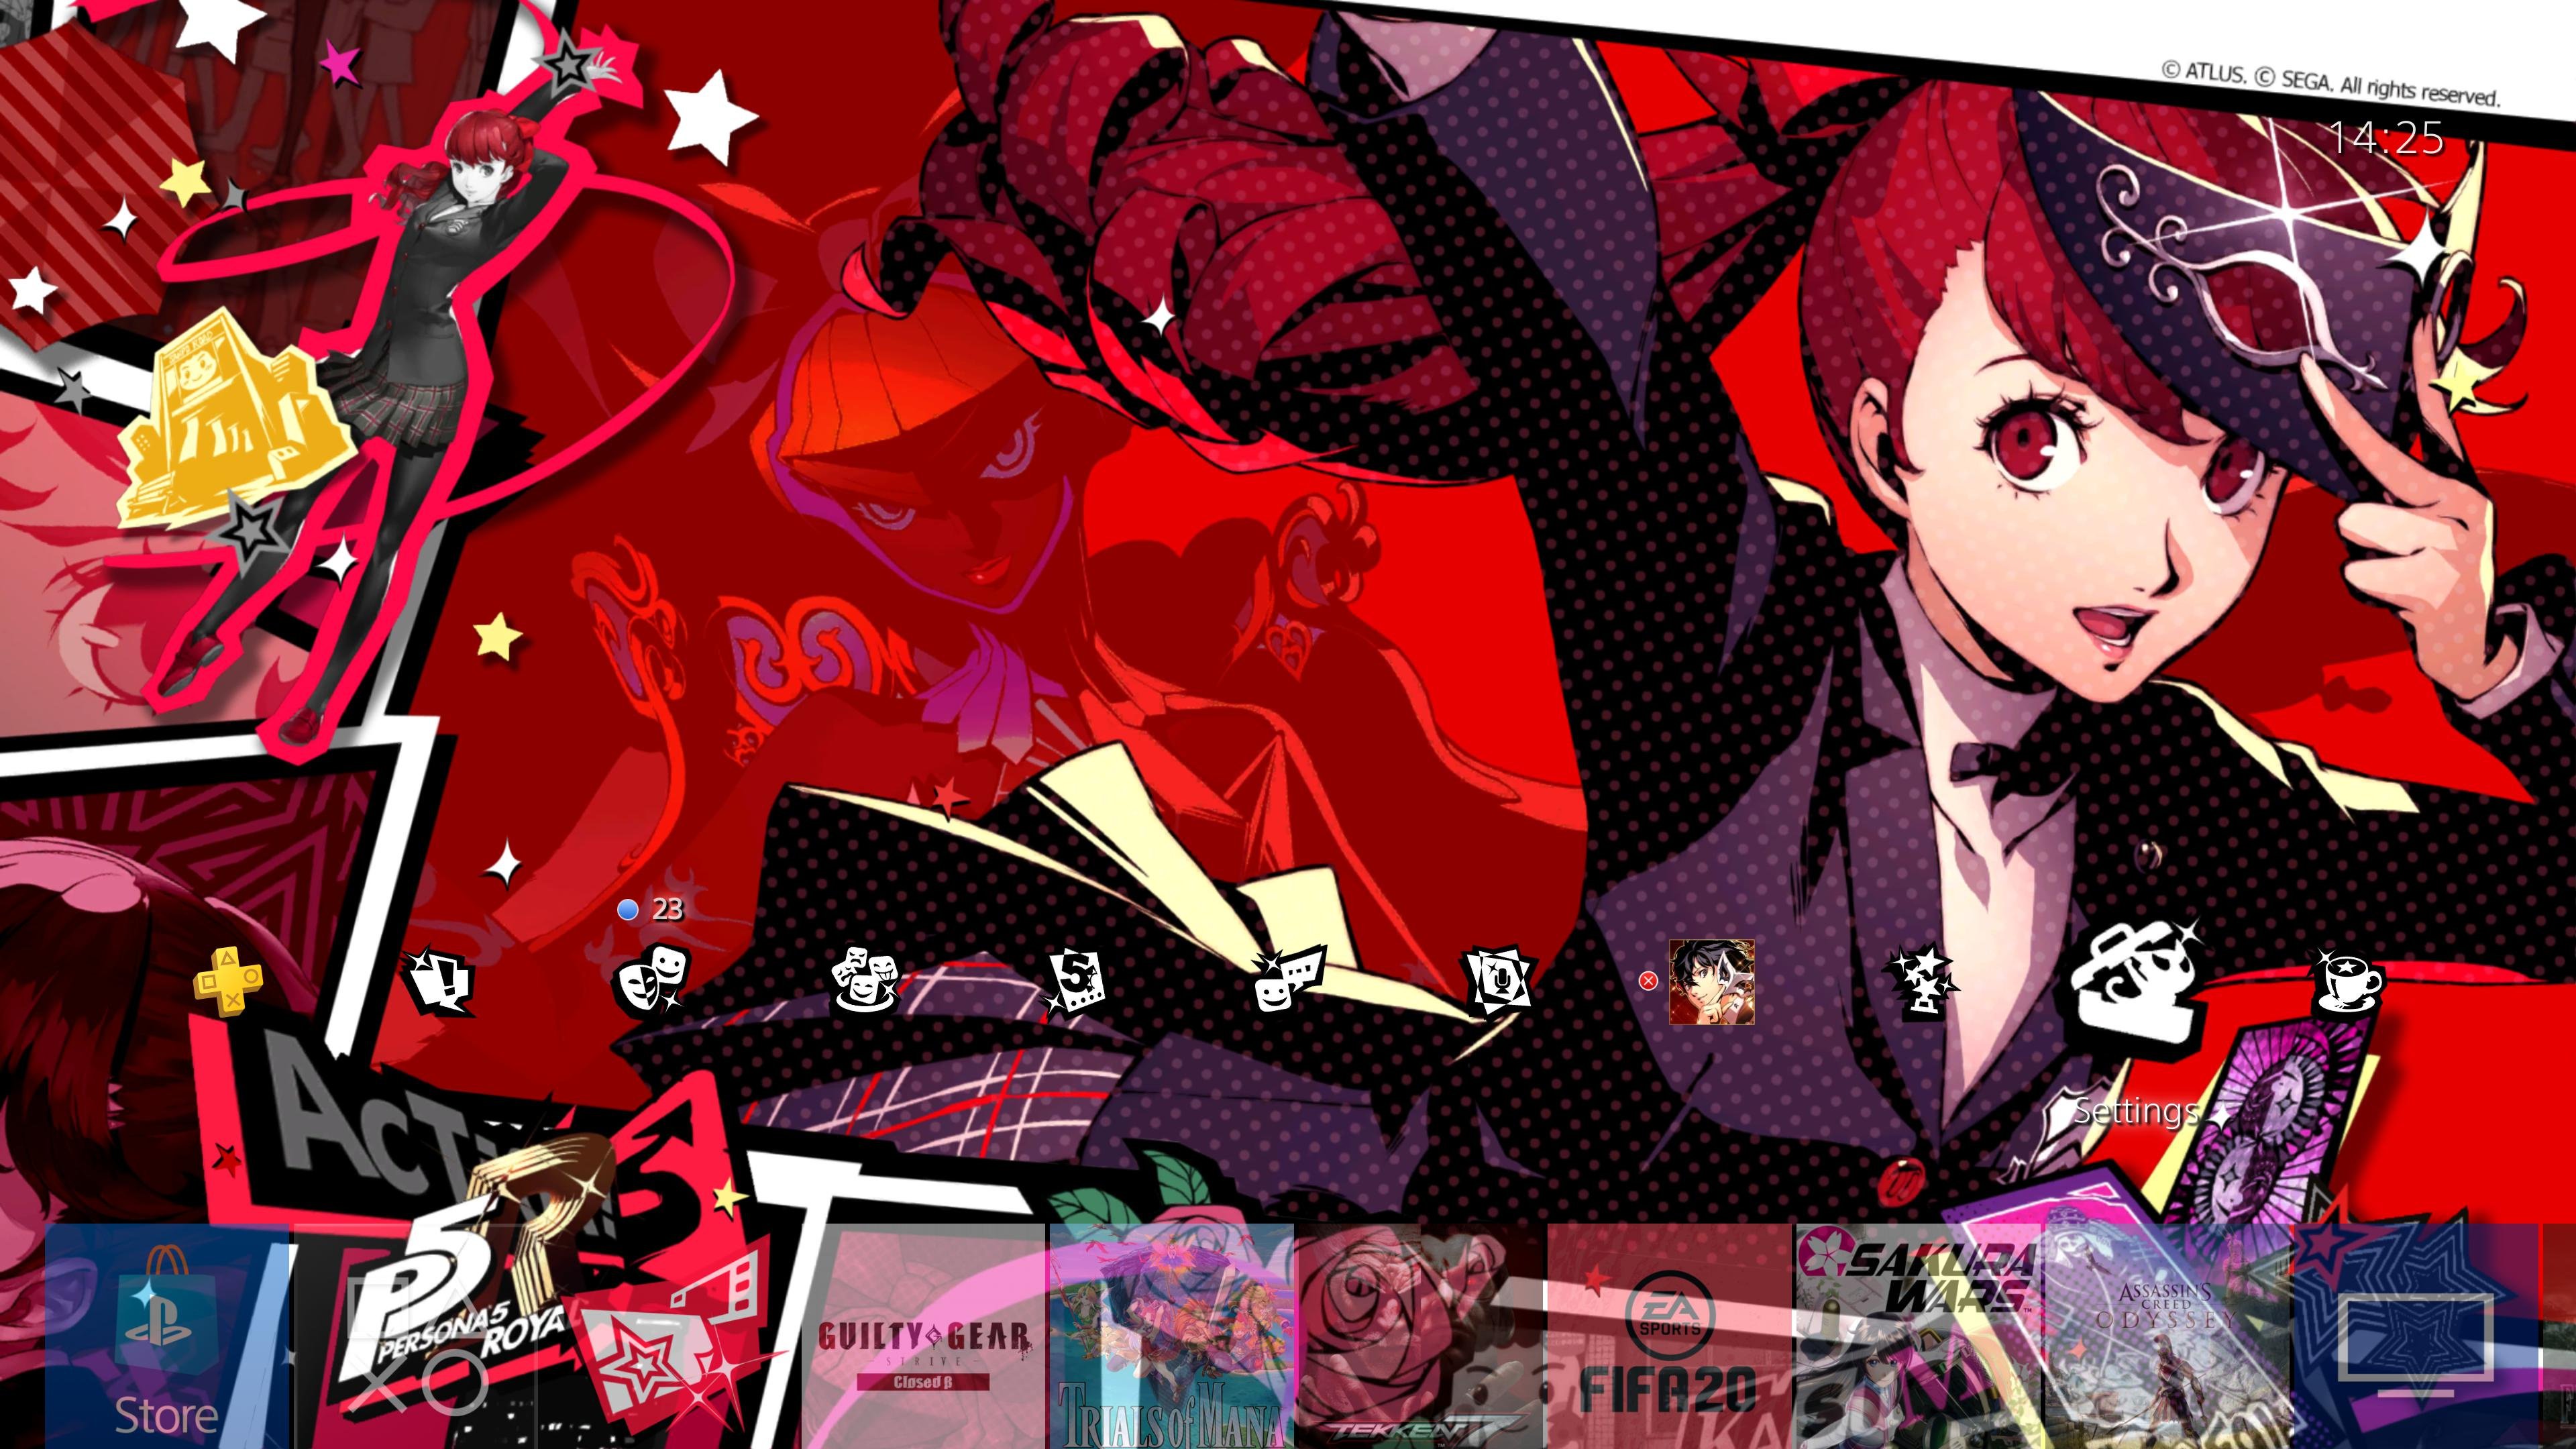 Sony Sending Out Even More Persona 5 Royal Dynamic Ps4 Themes And